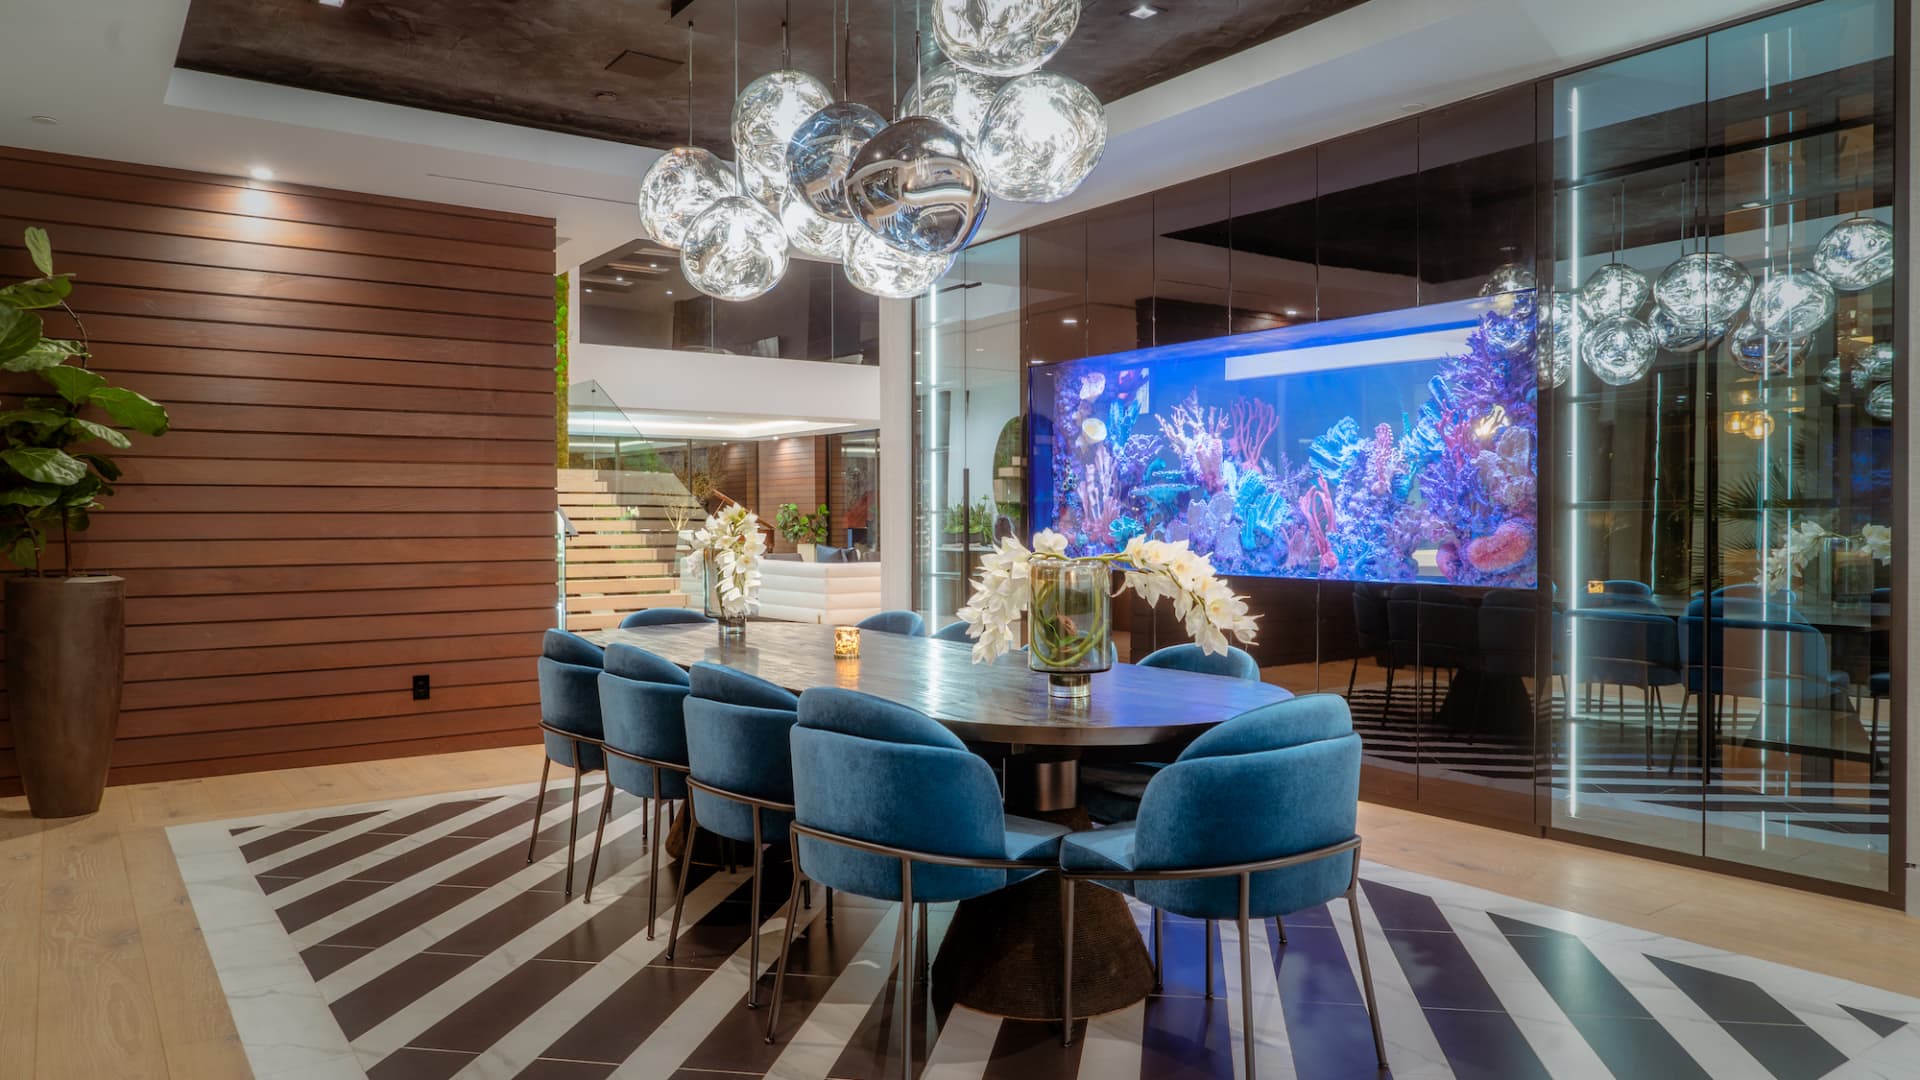 One wall of the dining room is a 1,000 gallon salt water aquarium with views into the kitchen on the other side.